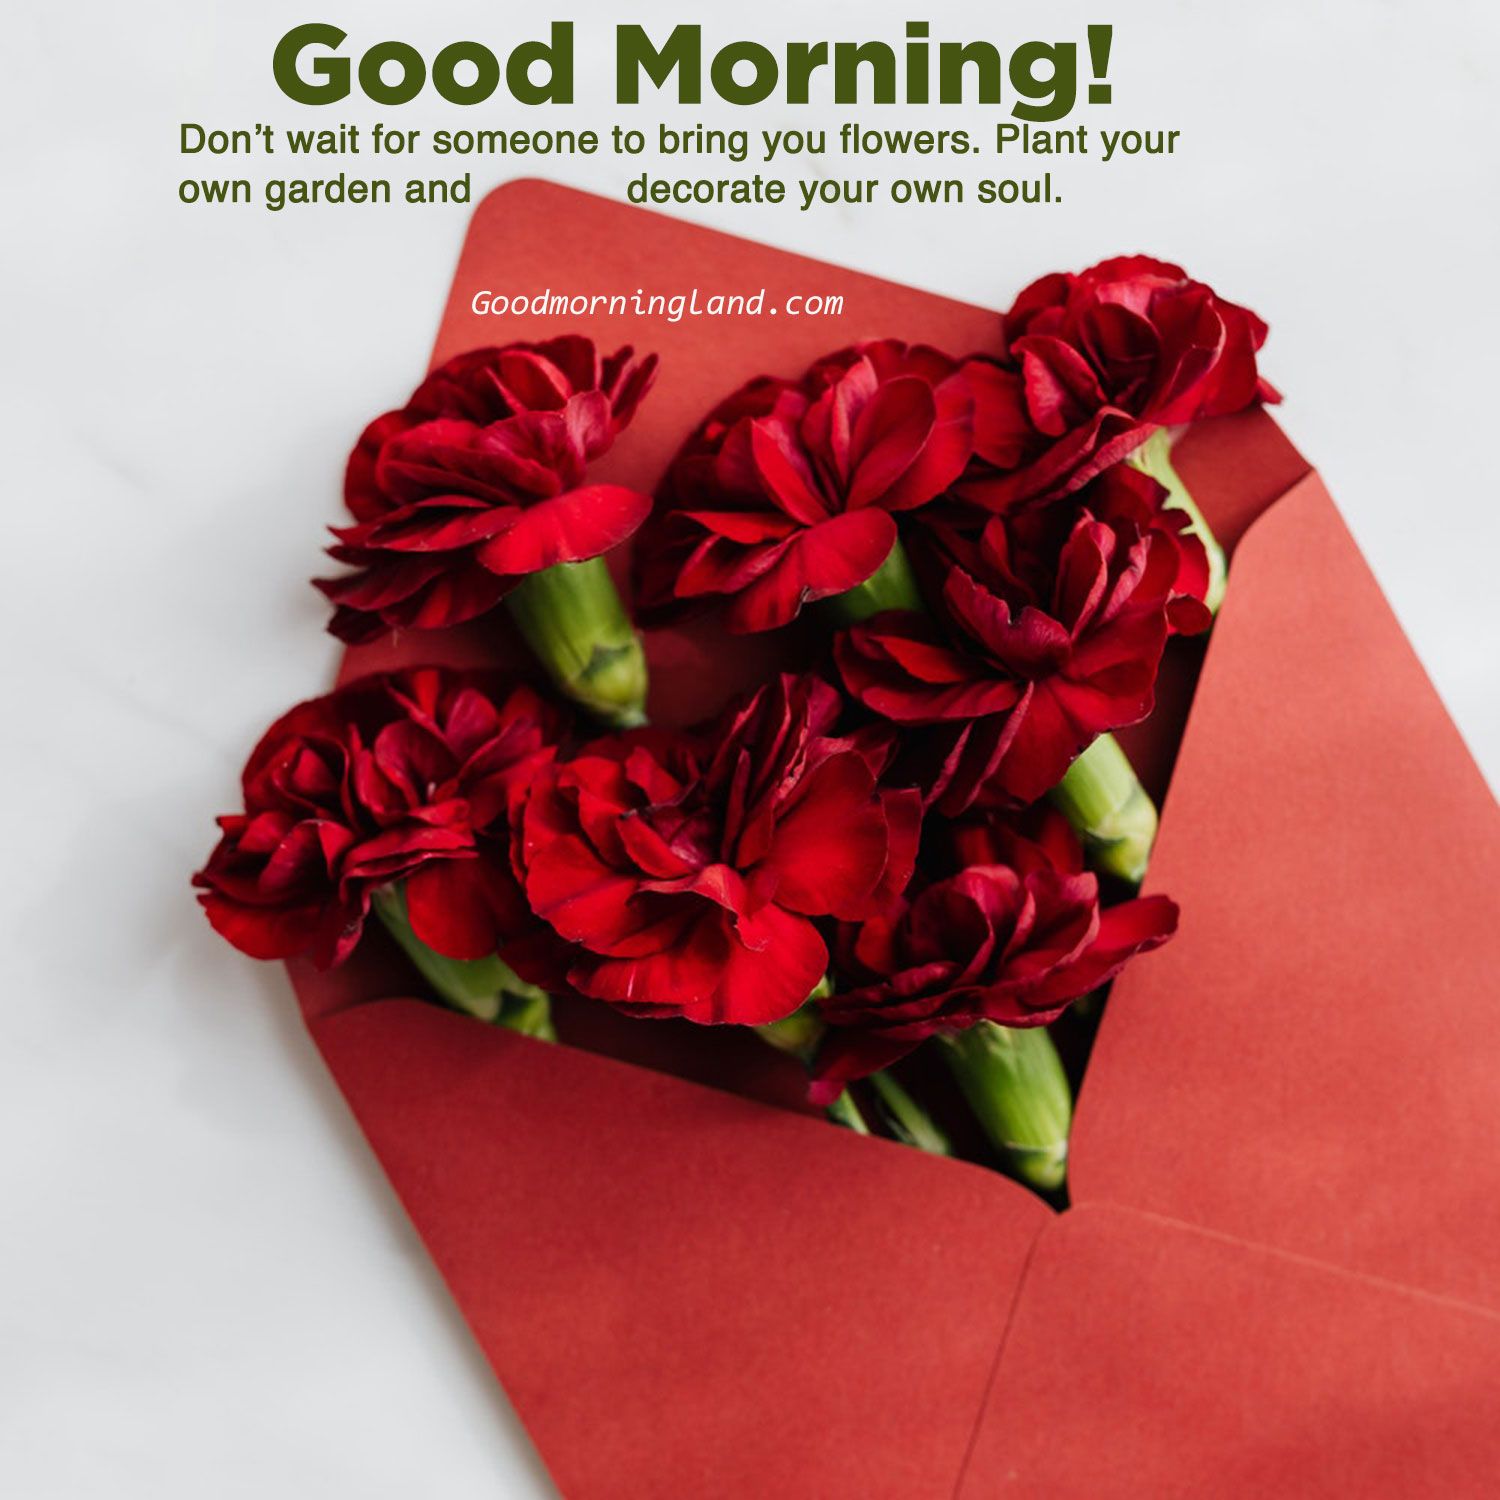 Latest 2020 Good morning flowers with image Morning Image, Quotes, Wishes, Messages, greetings & eCards